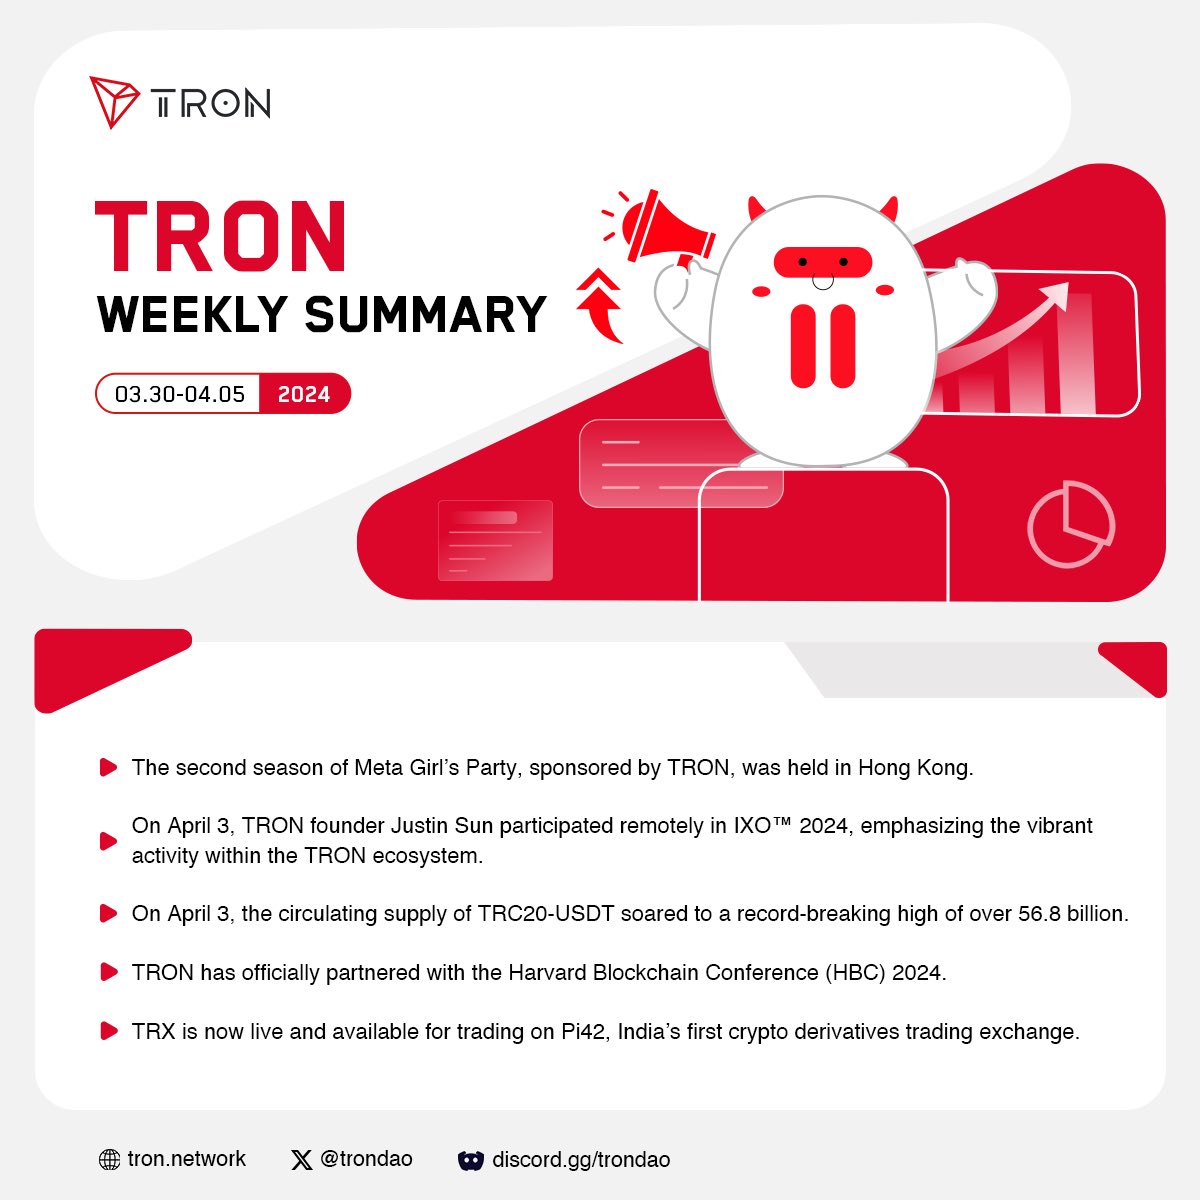 🧐Check out #TRON Highlights from this week (Mar 30, 2024 - Apr 5, 2024). 🙌We'll update you on the main news about #TRON and #TRON #Ecosystem. So stay tuned, #TRONICS!